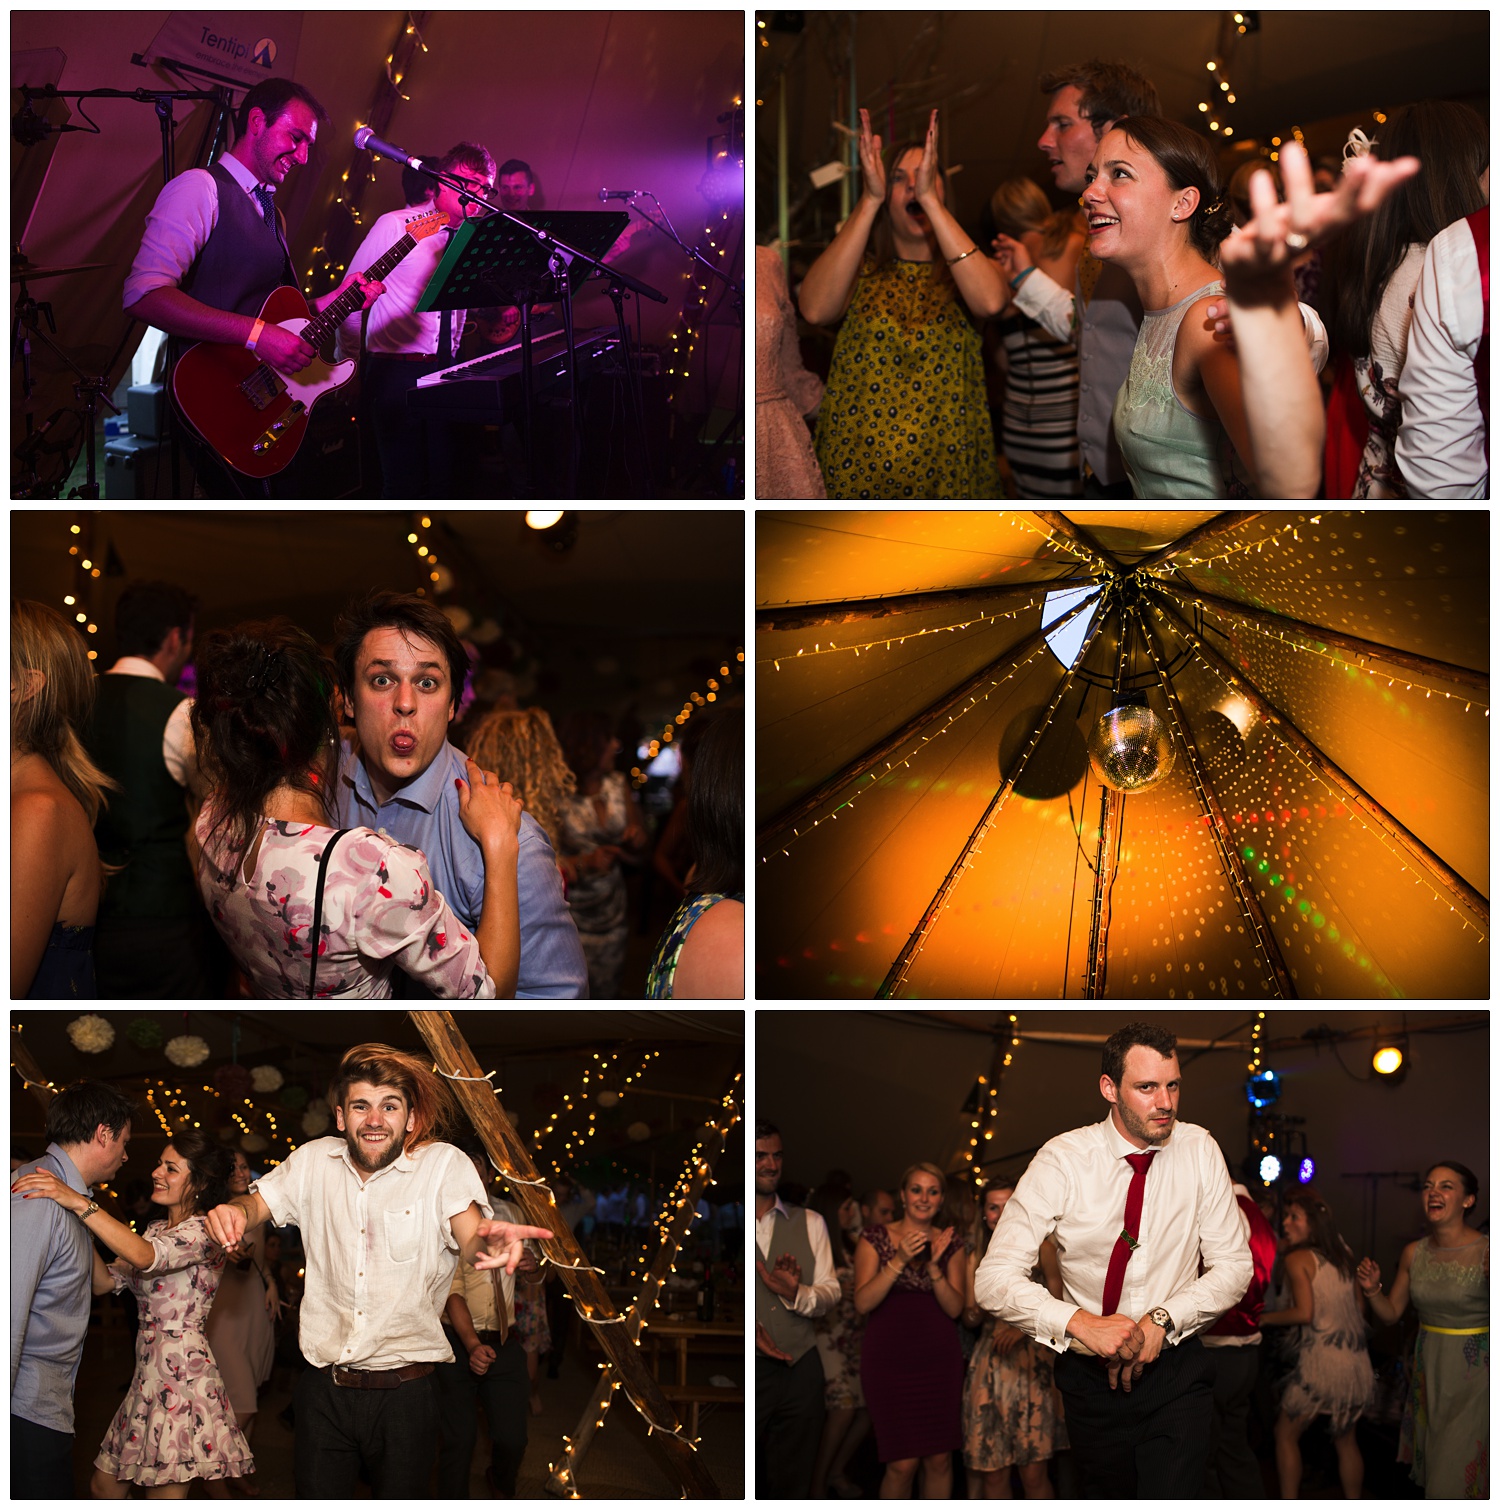 A Tentipi wedding reception. There is a disco ball, coloured lights and a band. People are dancing. A man sticks his tongue out at the camera.